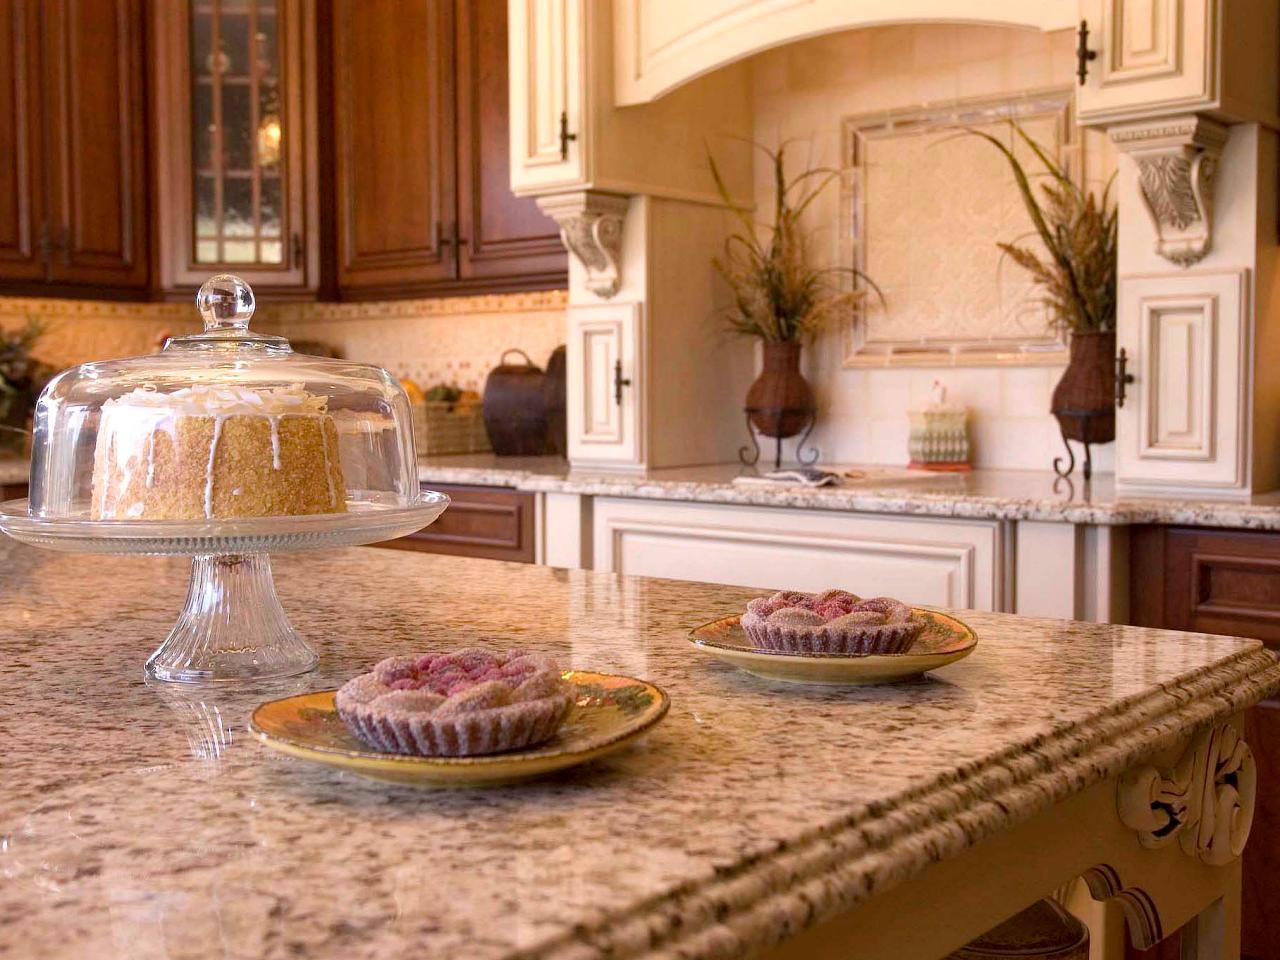 Painting Kitchen Countertops Pictures Ideas From HGTV HGTV